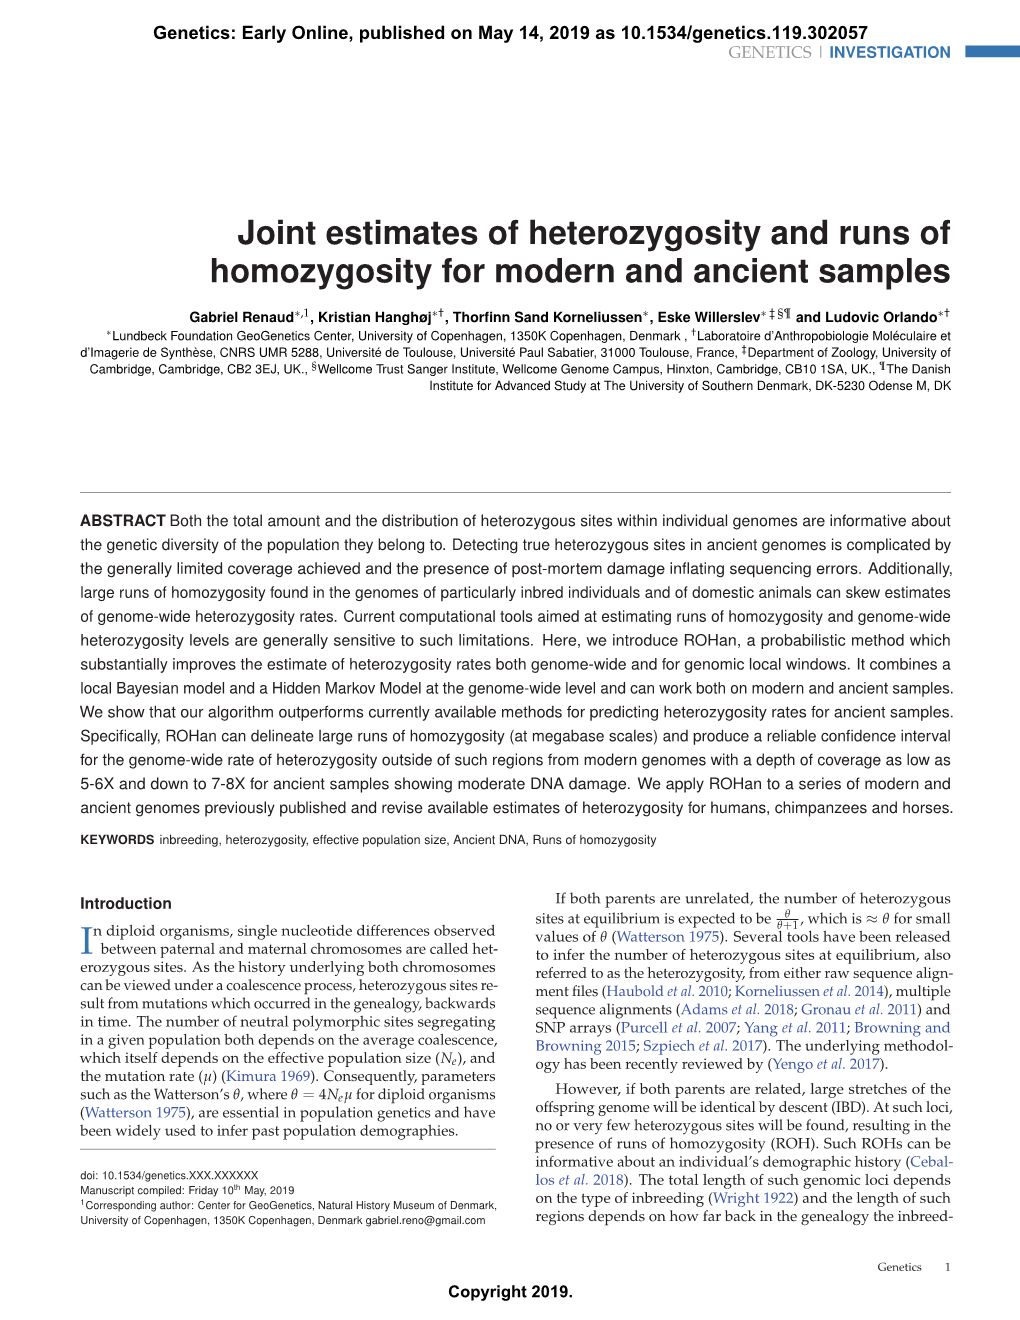 Joint Estimates of Heterozygosity and Runs of Homozygosity for Modern and Ancient Samples